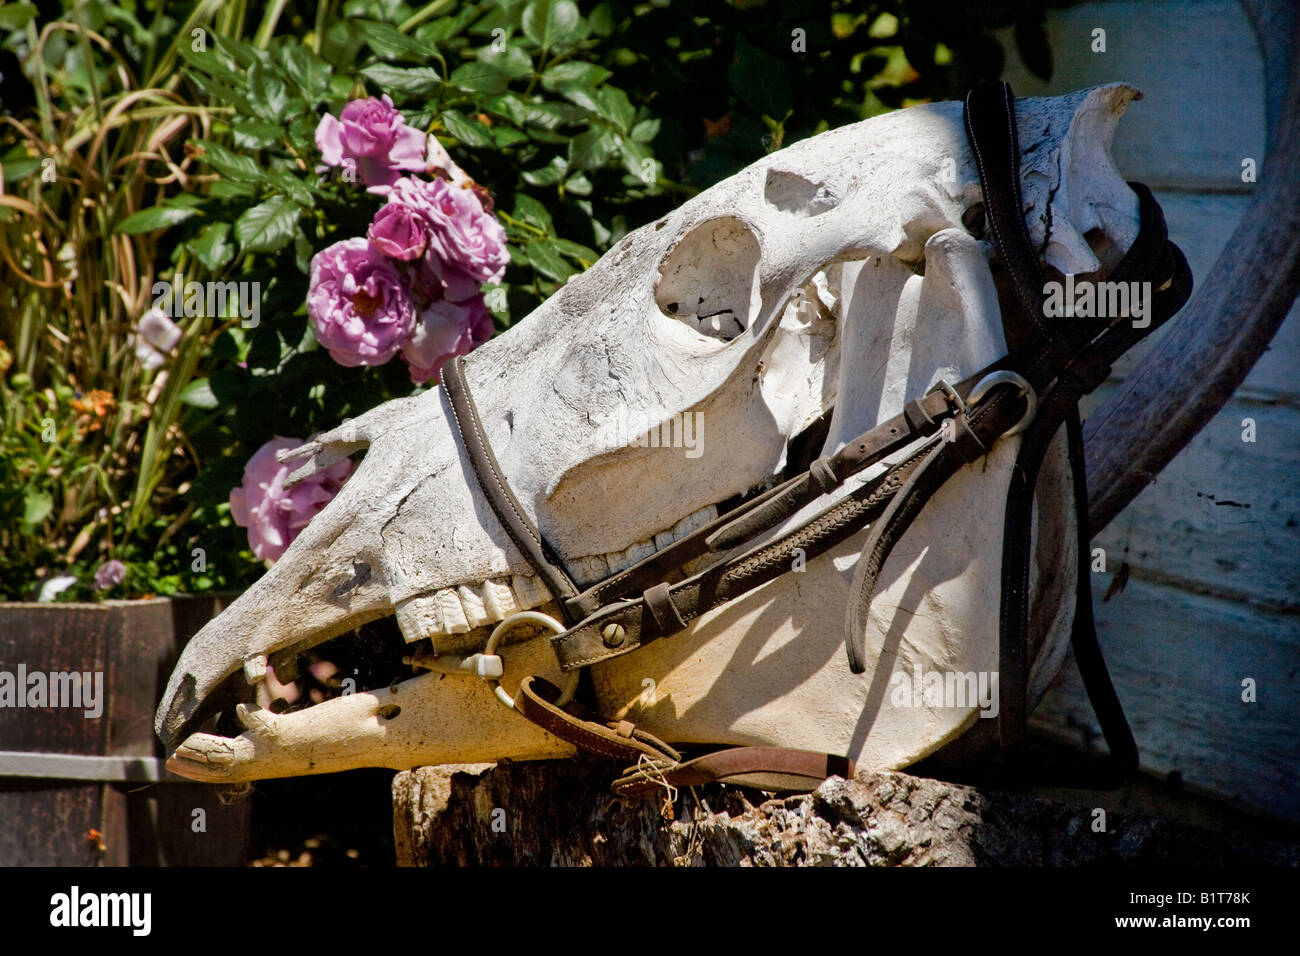 A horse skull wearing a bit and bridle make a bizarre decoration at an Oregon ranch Stock Photo